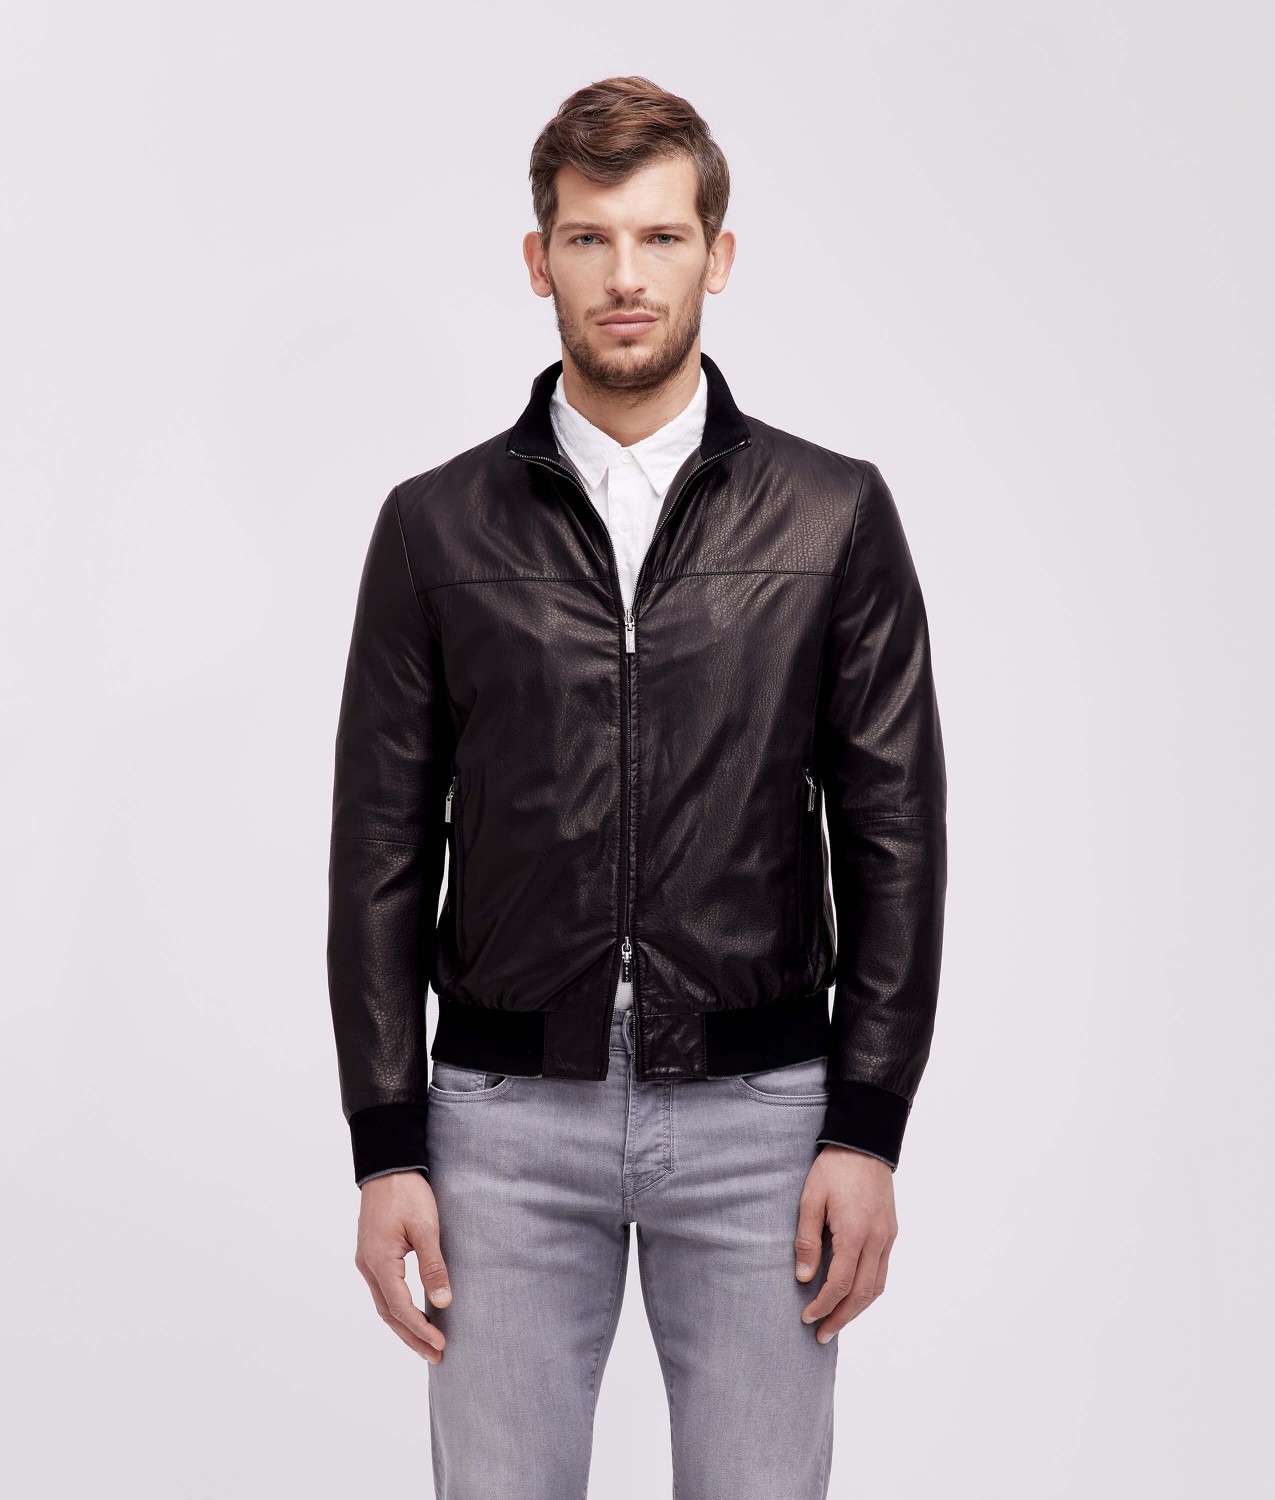 Men's Leather Outwear & Jackets Made in Italy - Gimo's